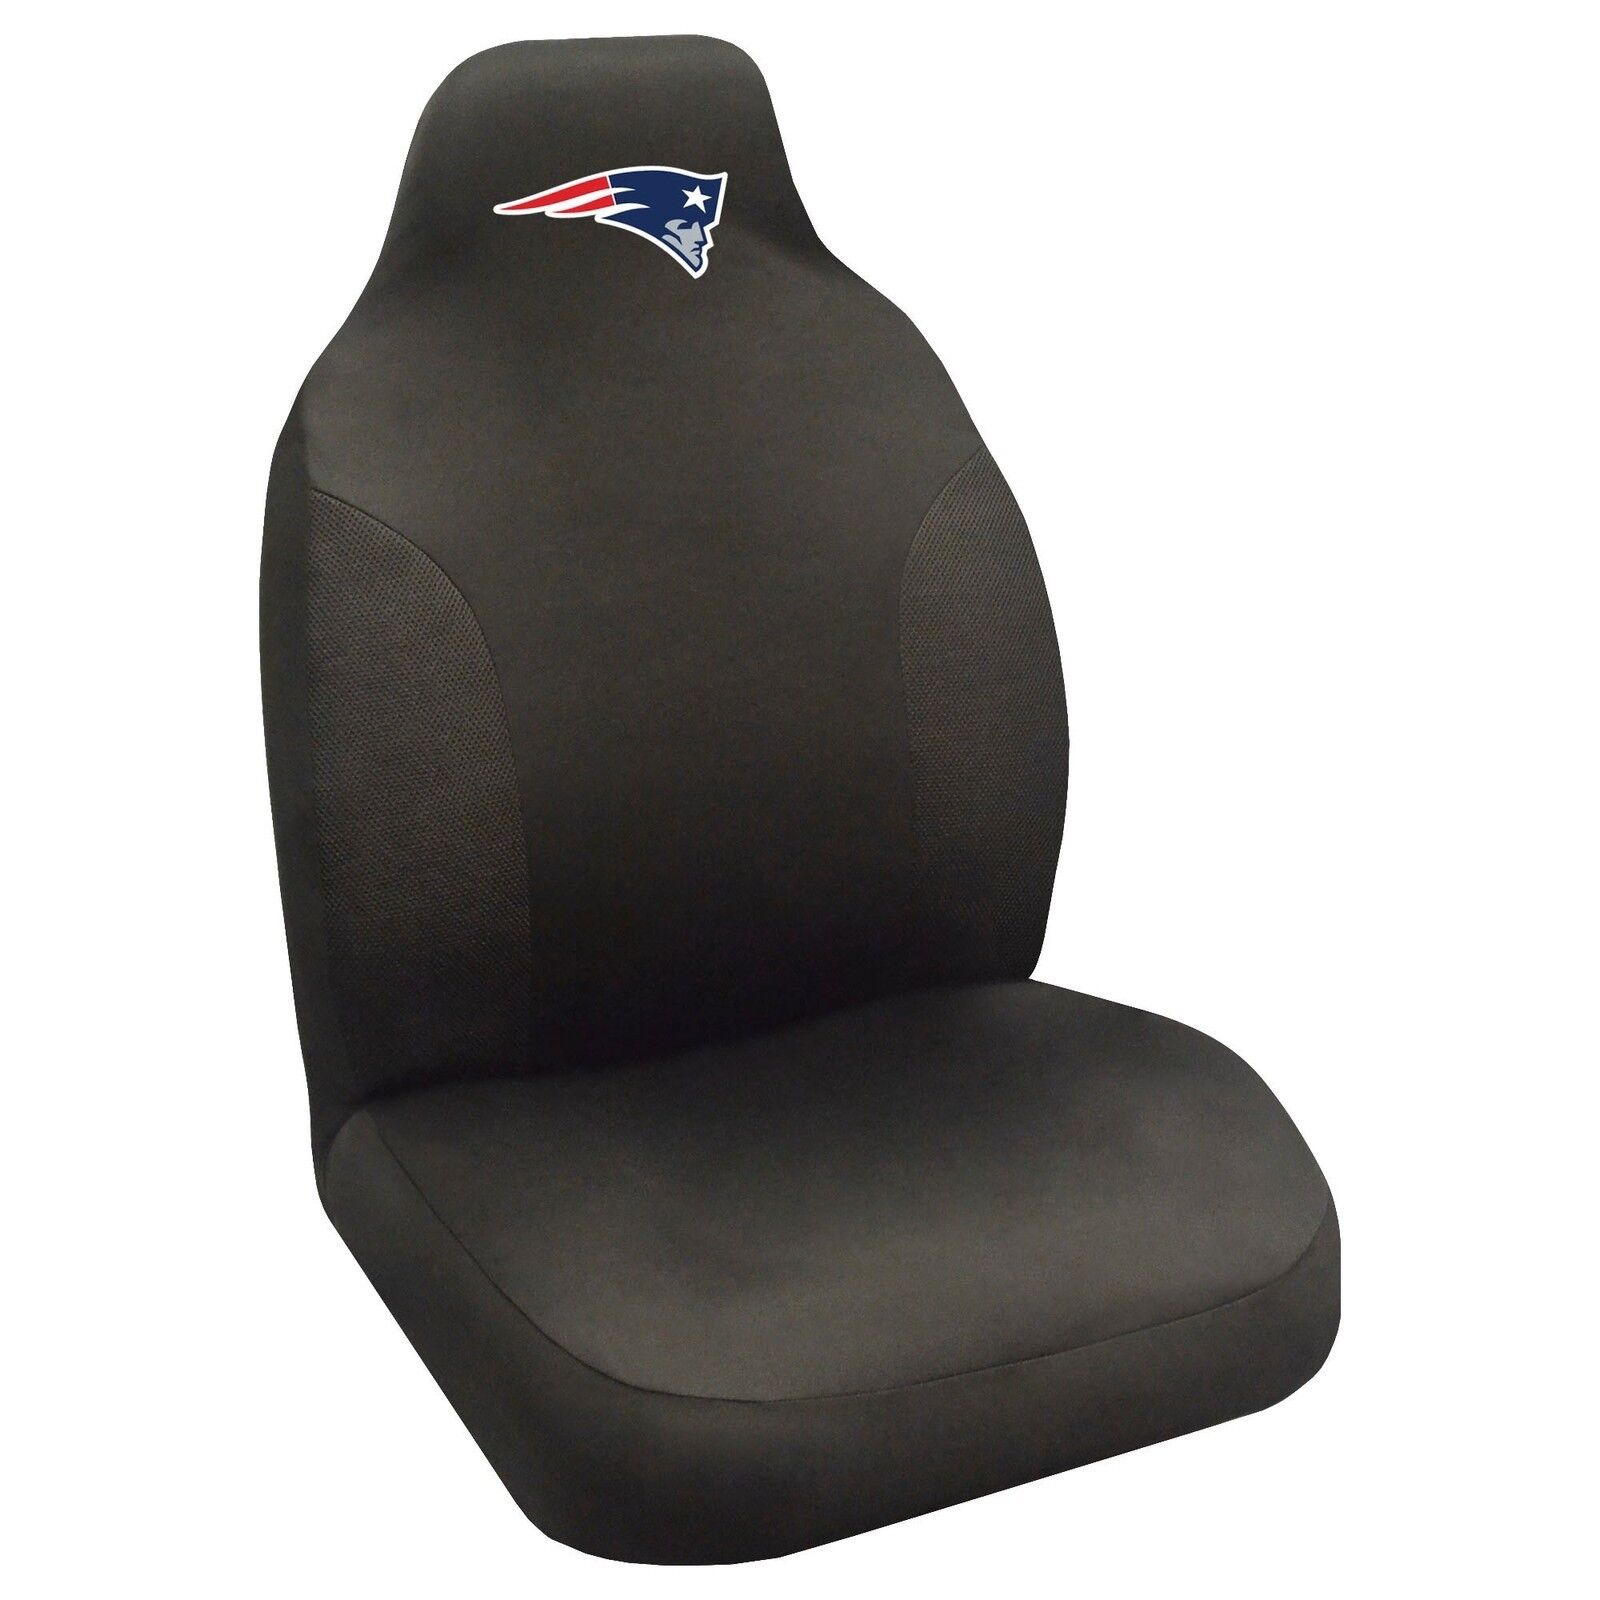 New NFL New England Patriots Car Truck Front Seat Cover - Official Licensed